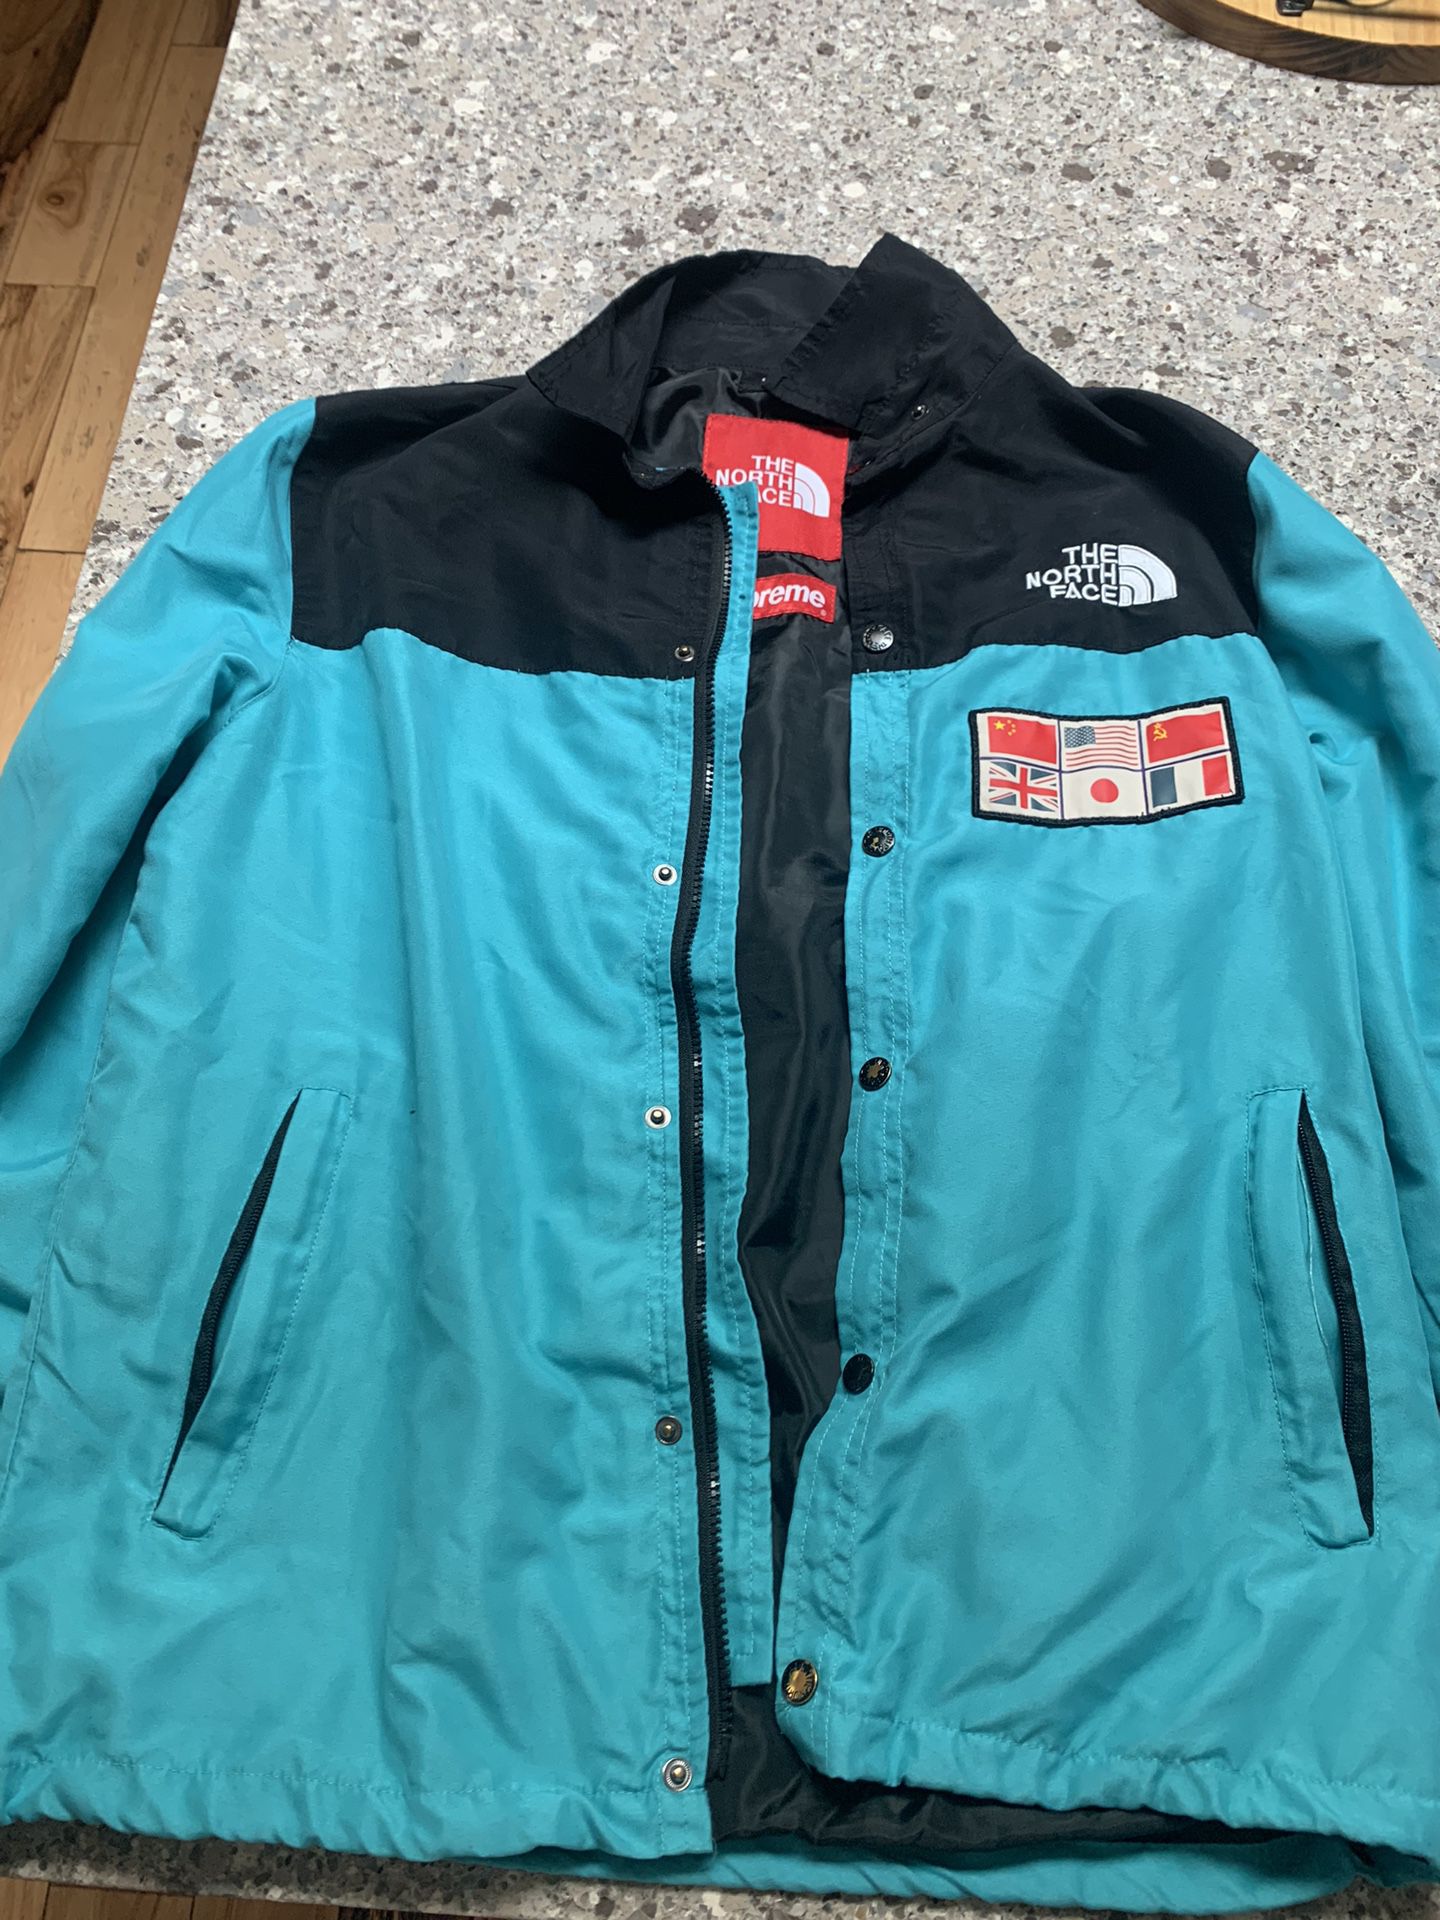 SS14 Supreme x TNF Expedition Coaches Jacket